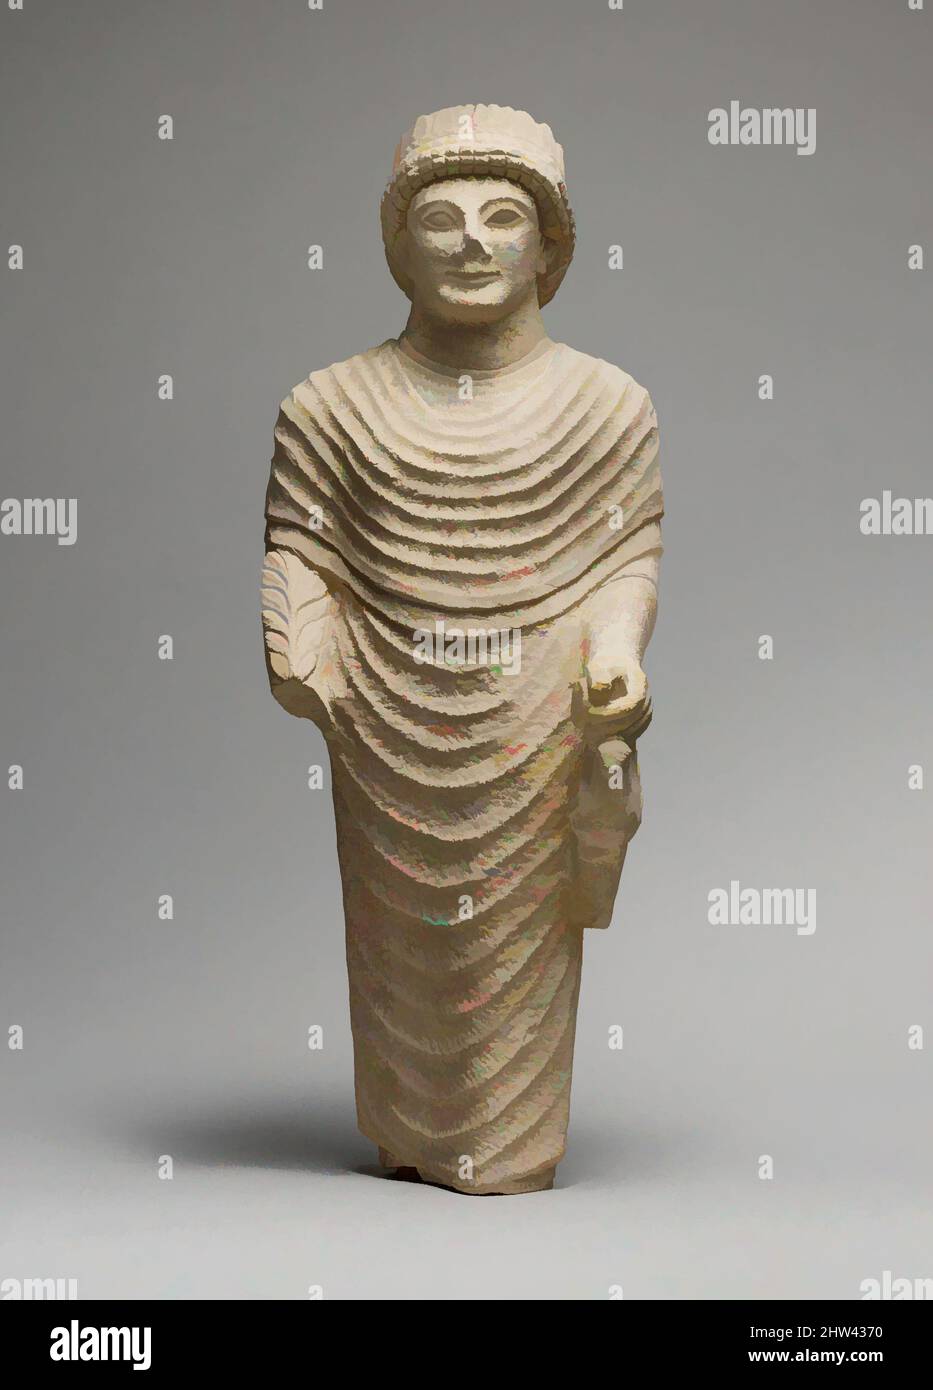 Art inspired by Limestone statue of a male votary holding a bird in the left hand, Late Cypro-Archaic–Early Cypro-Classical, ca 500–450 B.C., Cypriot, Limestone, Overall: 25 x 9 1/2 x 6 3/4 in. (63.5 x 24.1 x 17.1 cm), Stone Sculpture, The feet and the right hand are missing. The left, Classic works modernized by Artotop with a splash of modernity. Shapes, color and value, eye-catching visual impact on art. Emotions through freedom of artworks in a contemporary way. A timeless message pursuing a wildly creative new direction. Artists turning to the digital medium and creating the Artotop NFT Stock Photo